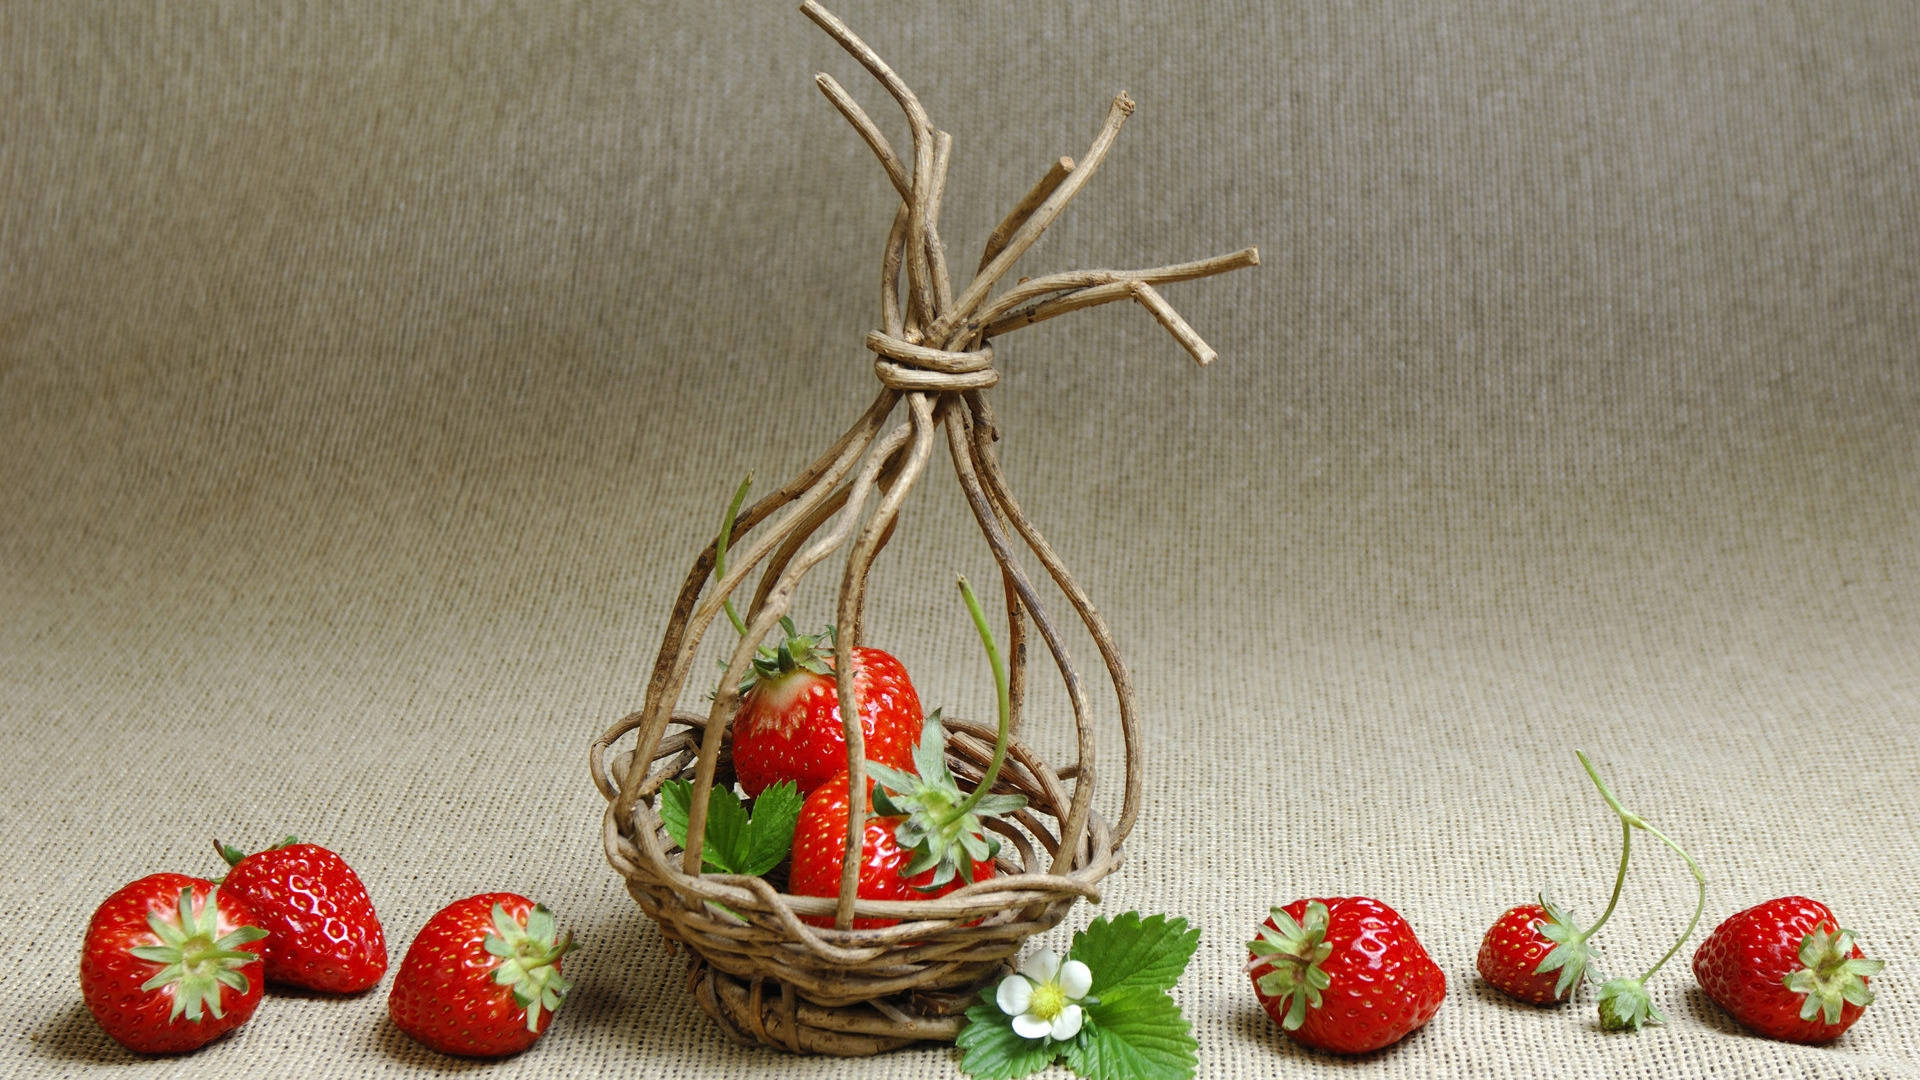 Woven Nest With Strawberry Desktop Background